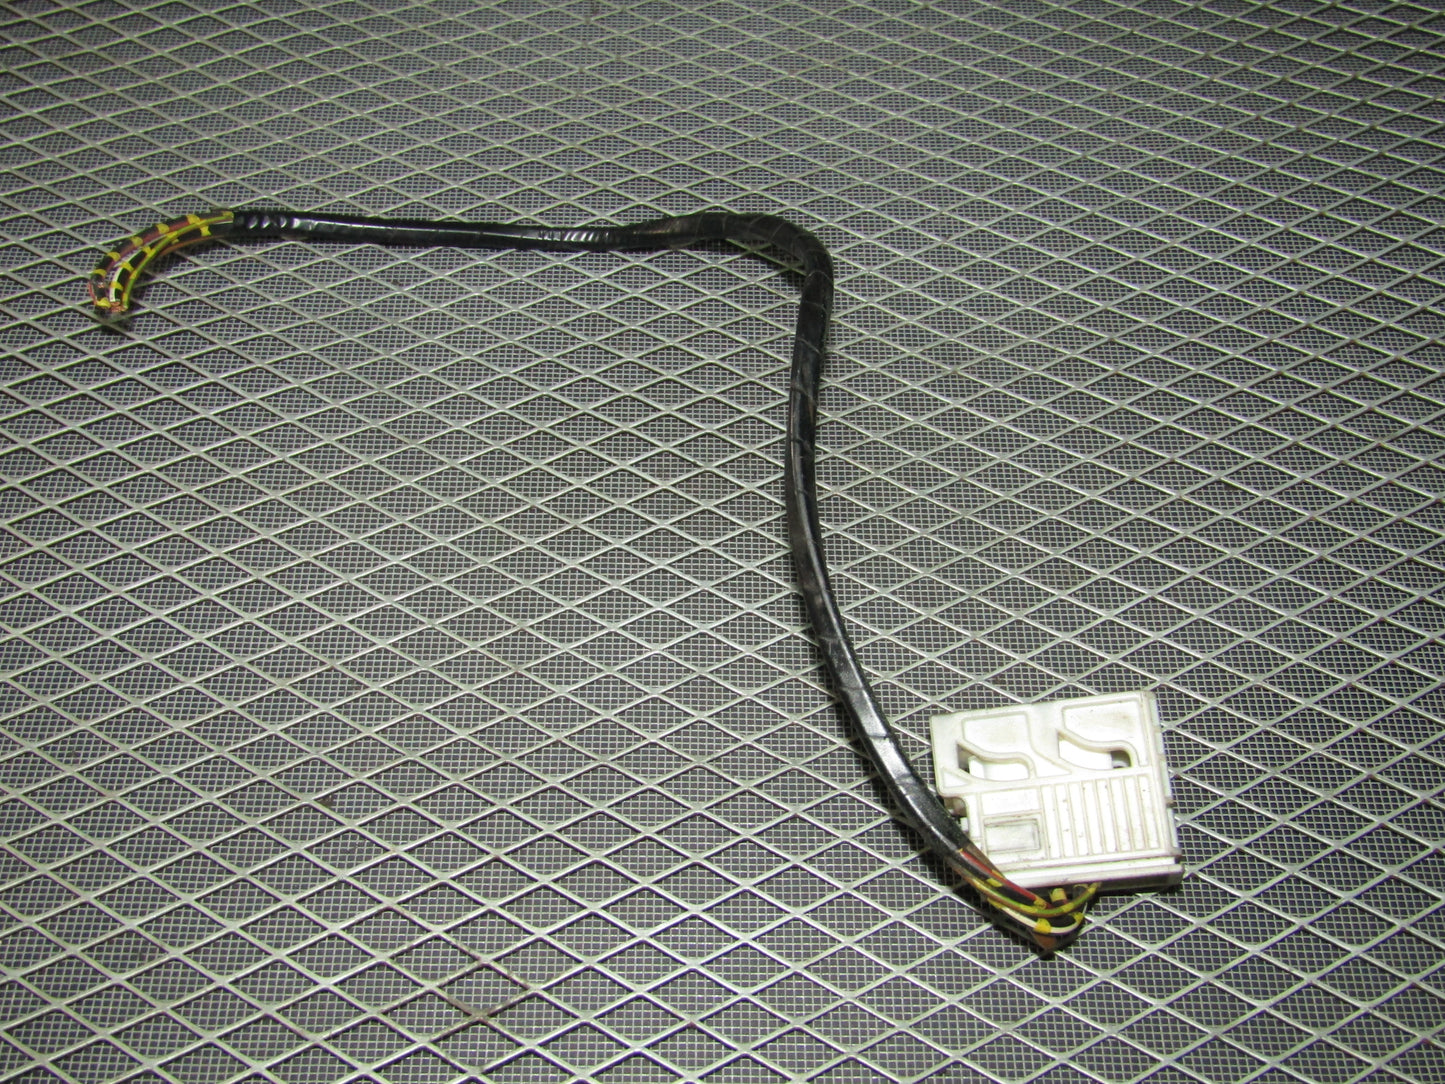 92 93 94 95 BMW 325 OEM Front Wiper Motor Pigtail Harness